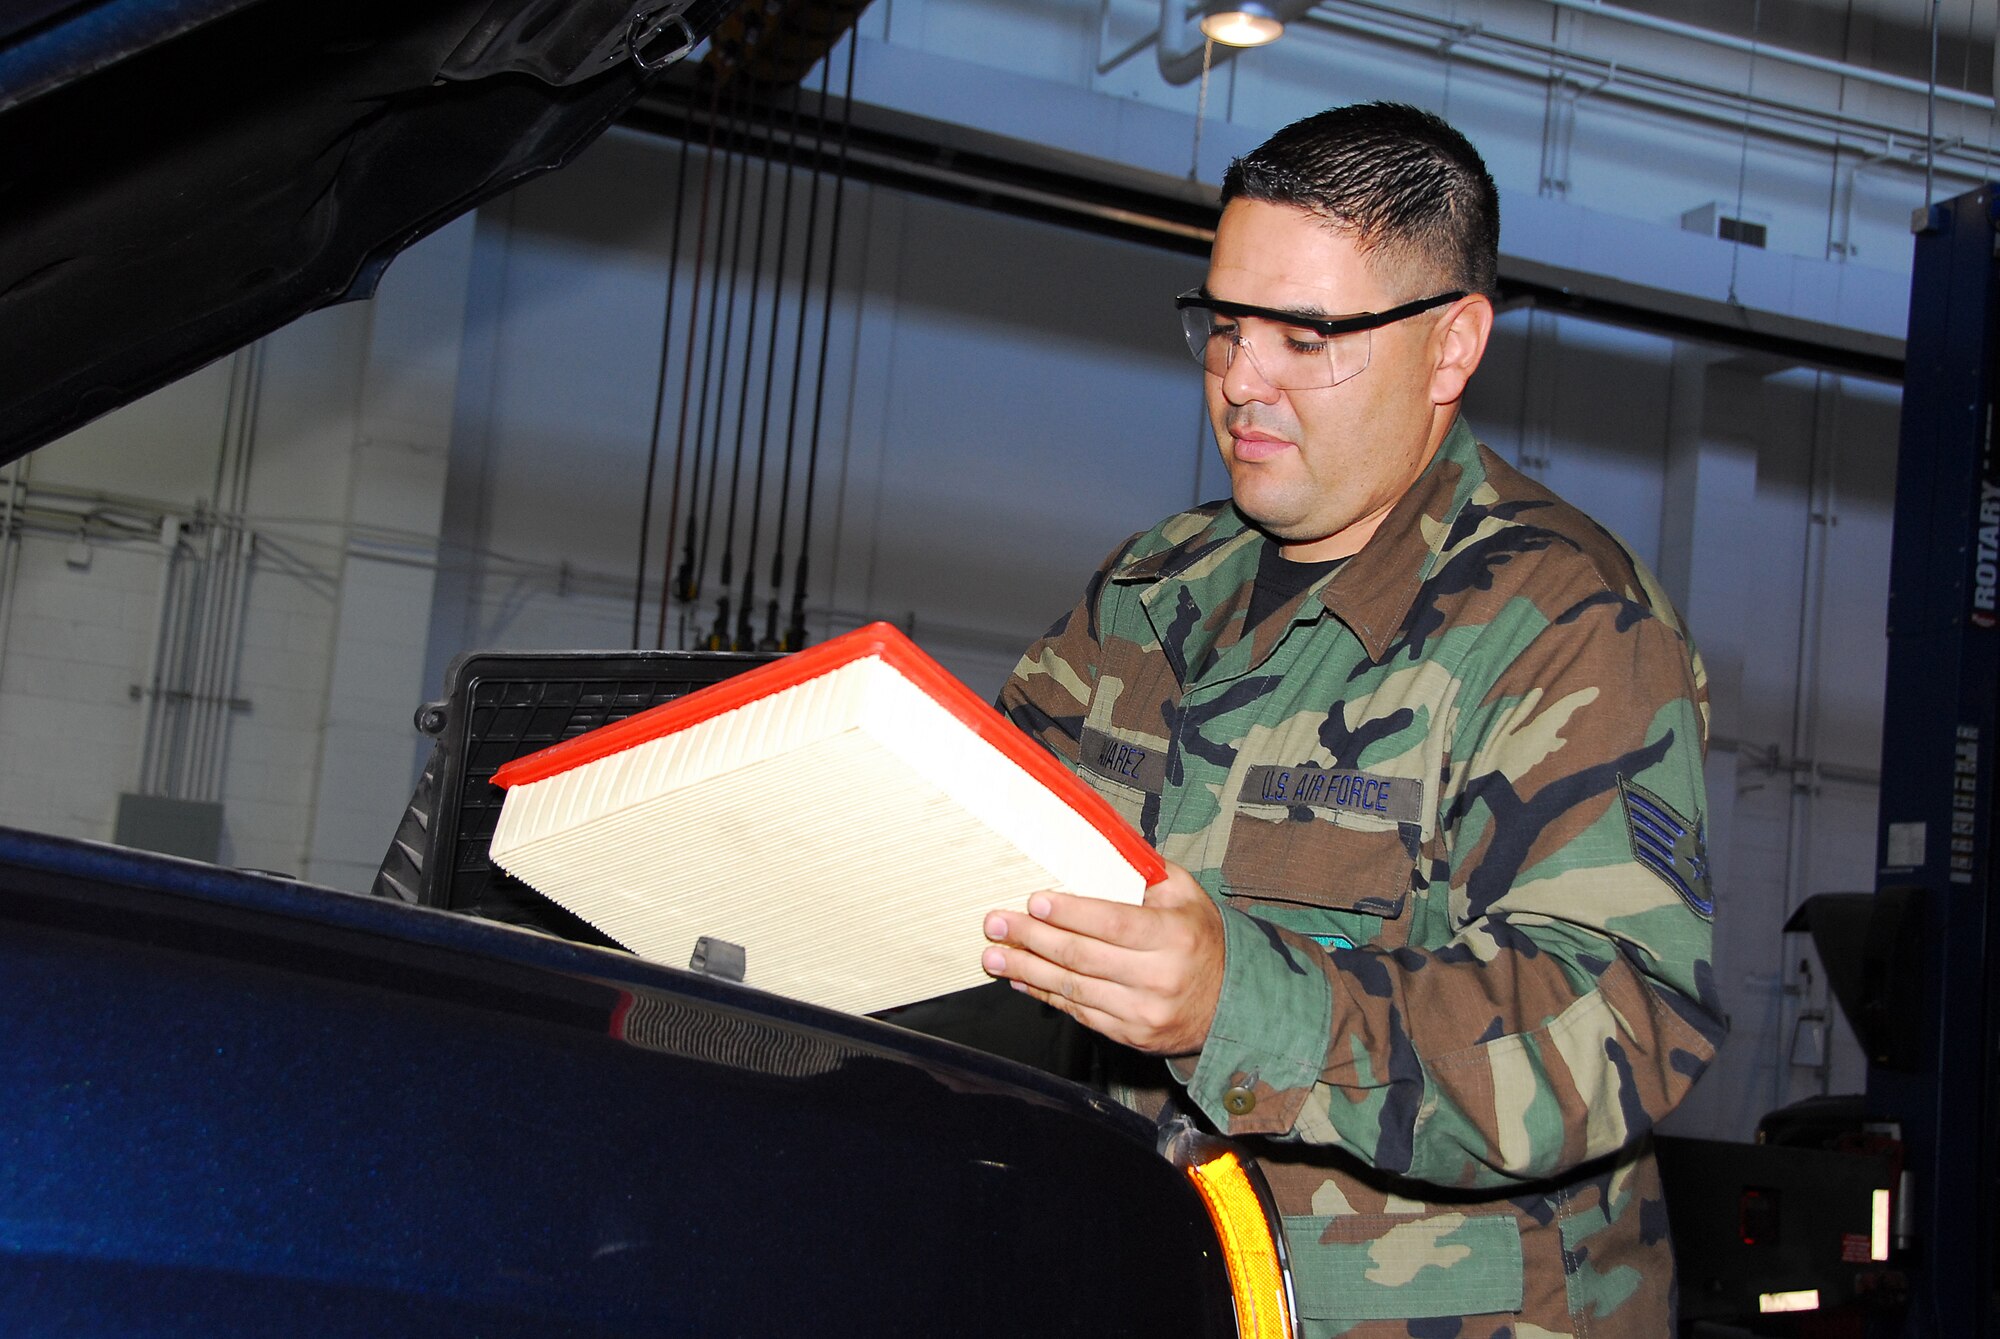 Vehicle Maintenance Mechanic, Staff Sgt. Mario Alvarez, inspects an air filter from a government truck to ensure the vehicle’s fuel efficiency. (Air National Guard photo by Master Sgt. David Neve)